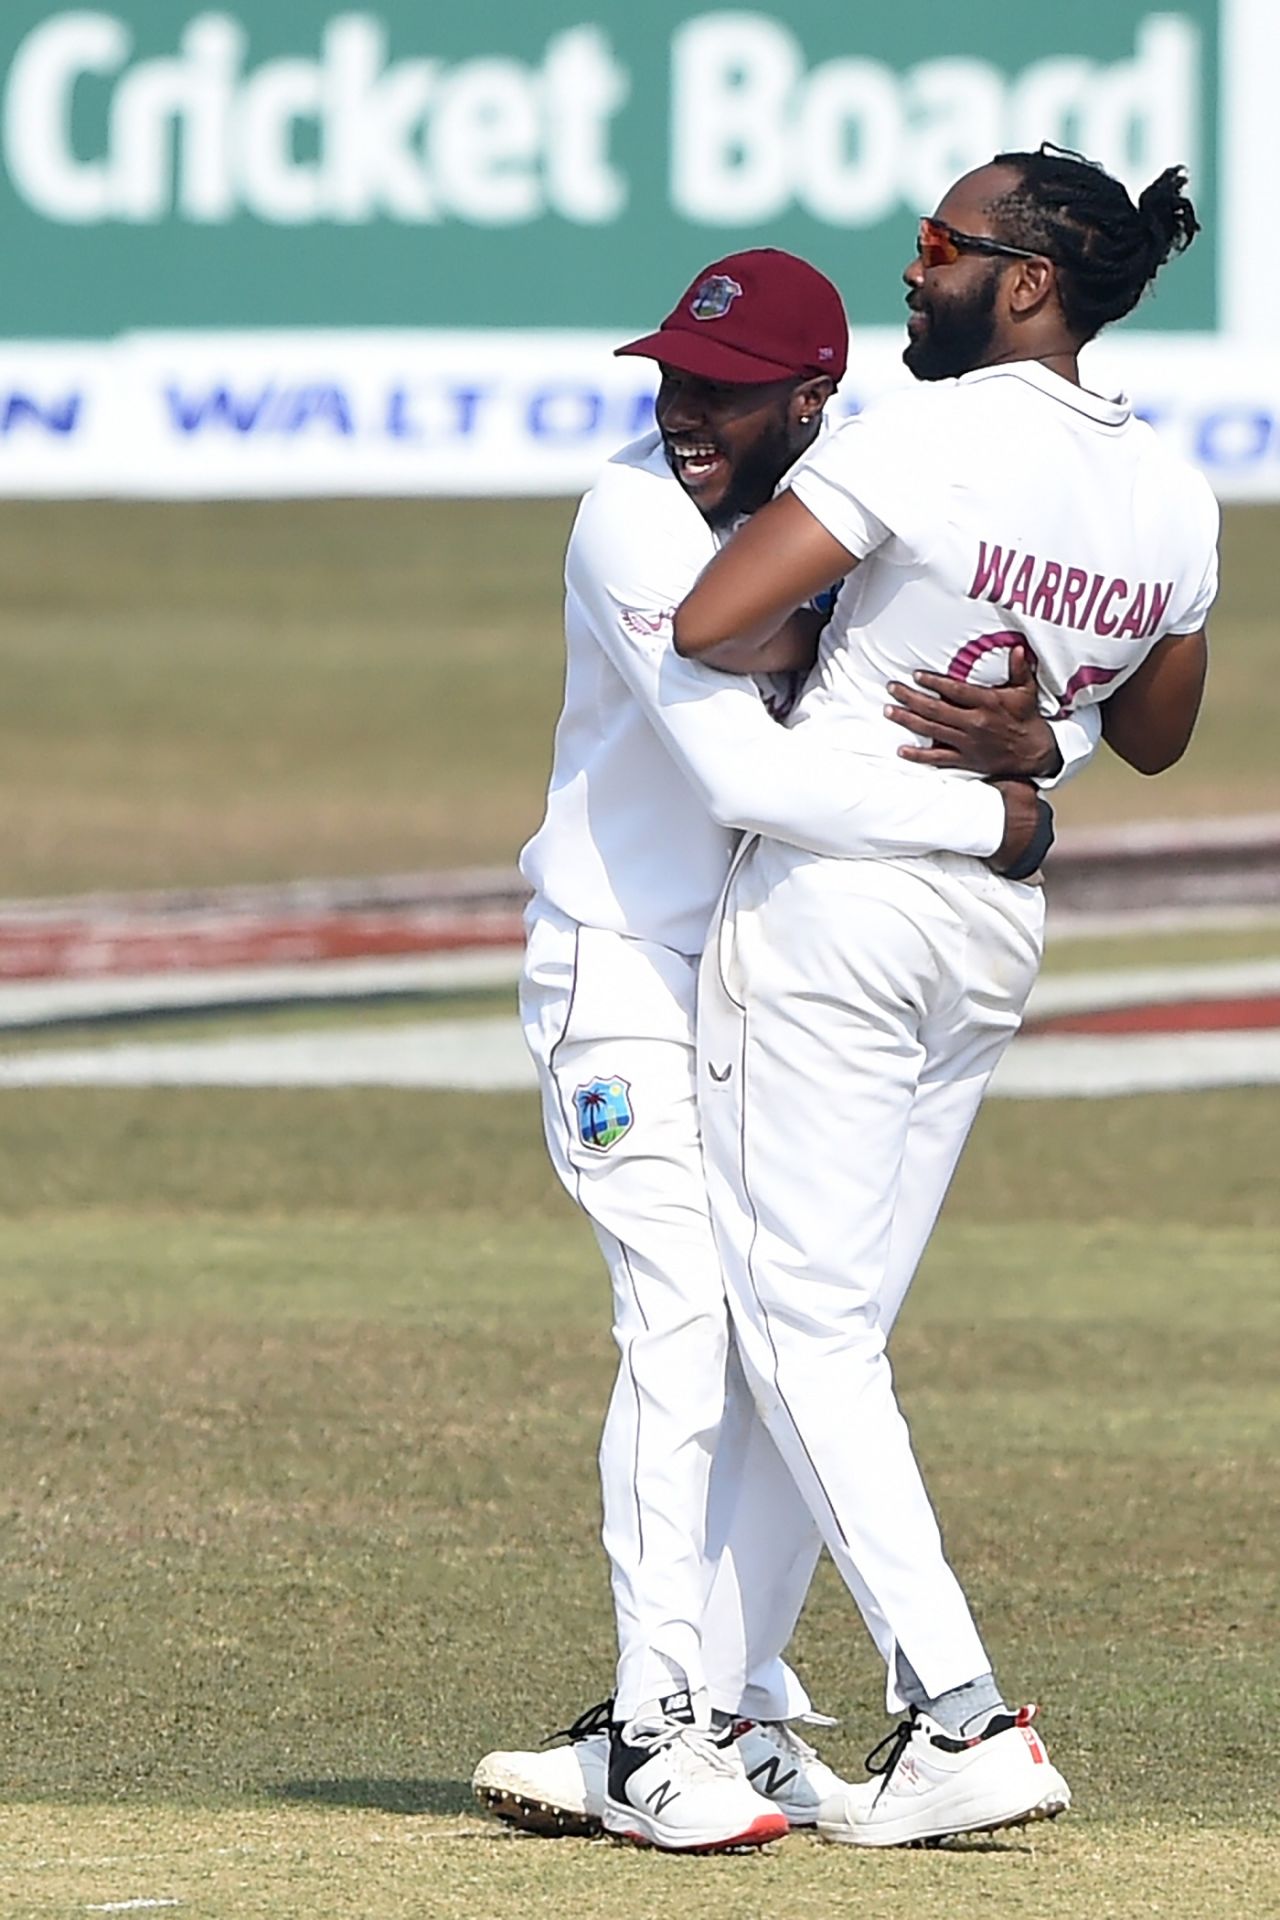 Jomel Warrican and Jermaine Blackwood celebrate a wicket, Bangladesh vs West Indies, 1st Test, Chattogram, day 1, February 3, 2021